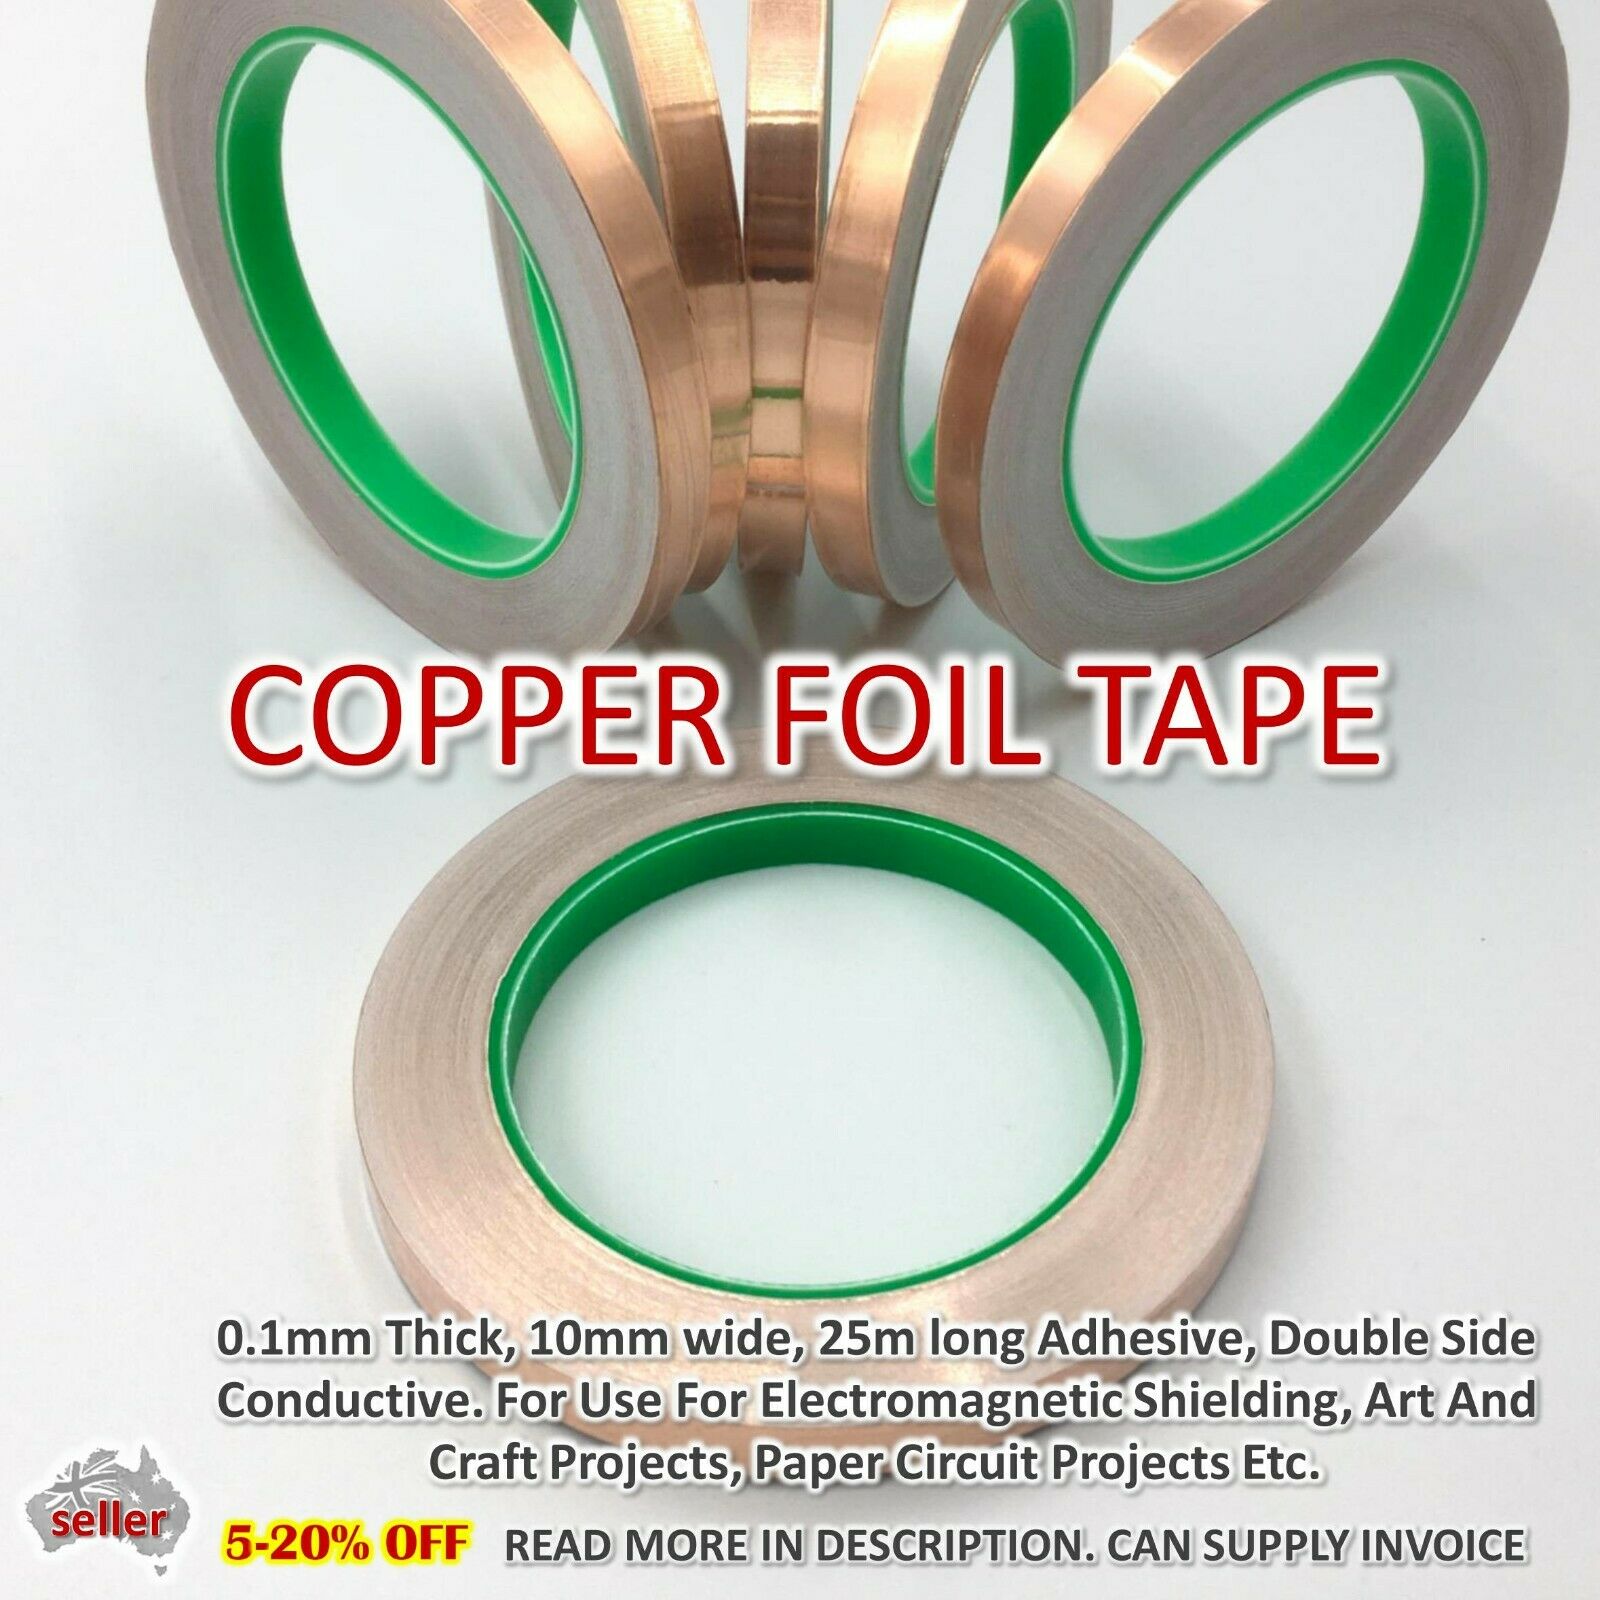 Adhesive Copper Foil Tape Single-sided Conductive - For Emi Shielding,  Paper Circuits, Slug Repellent, Crafts, Electrical Repairs